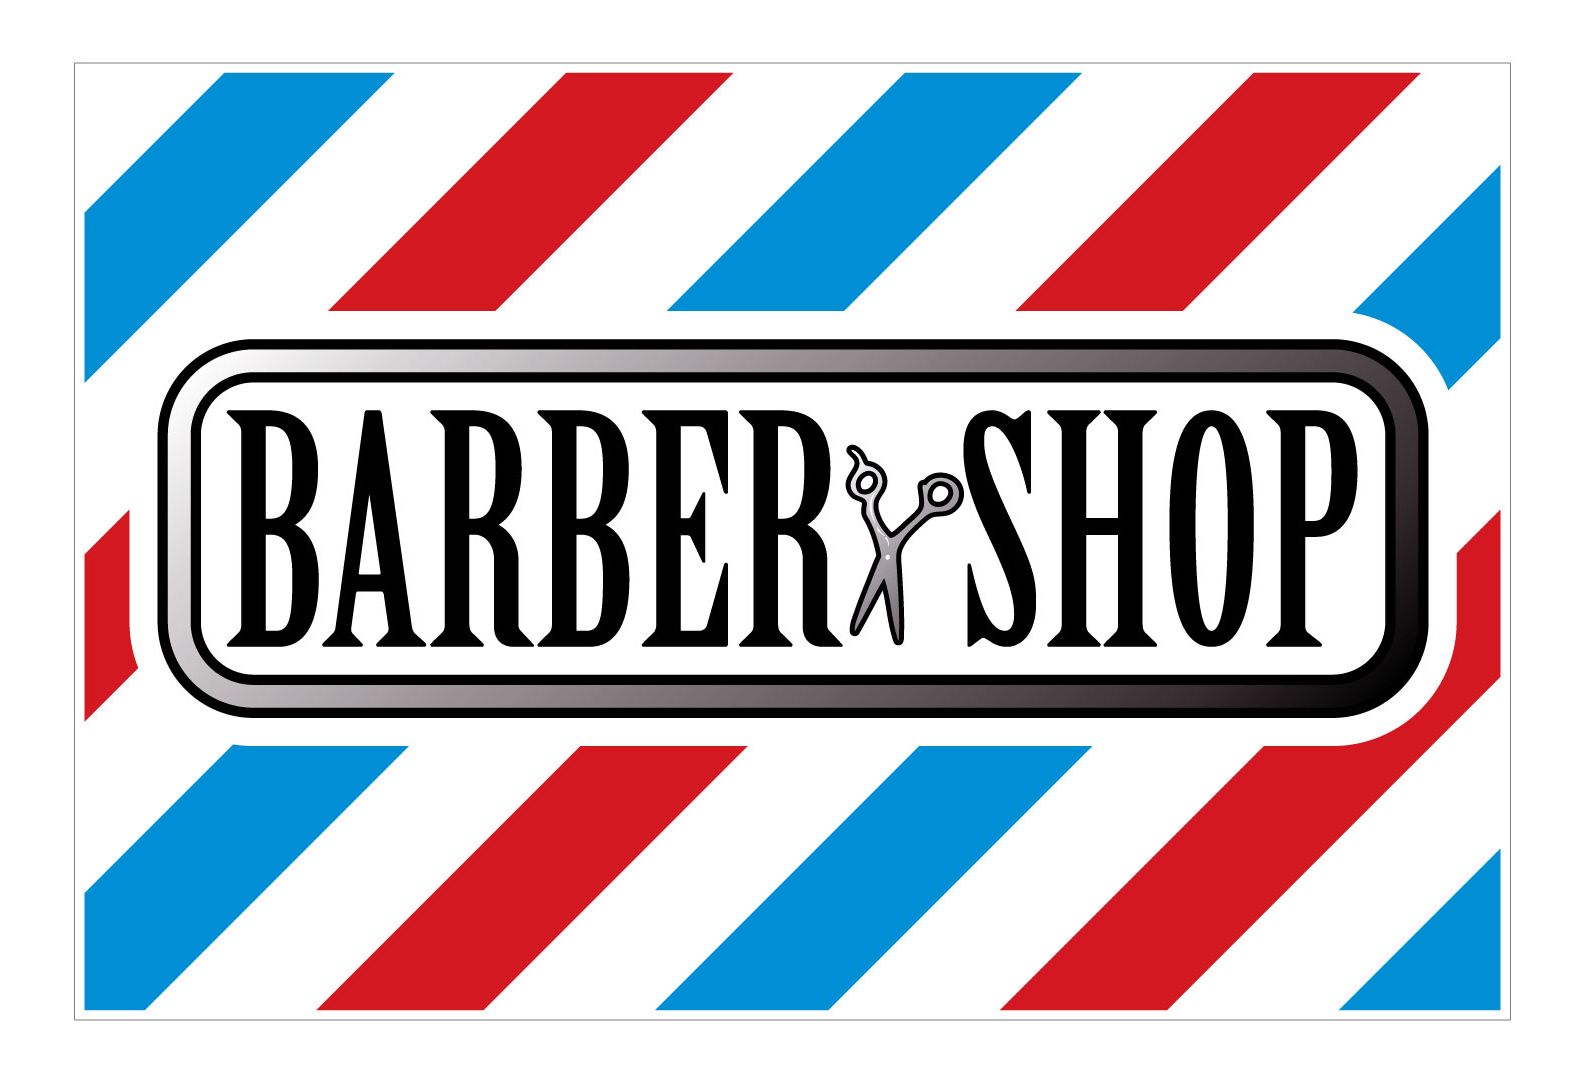 Details about  / Weatherproof Yard Sign Your Text Here Barber Shop Restaurant Cafe Lawn Garden